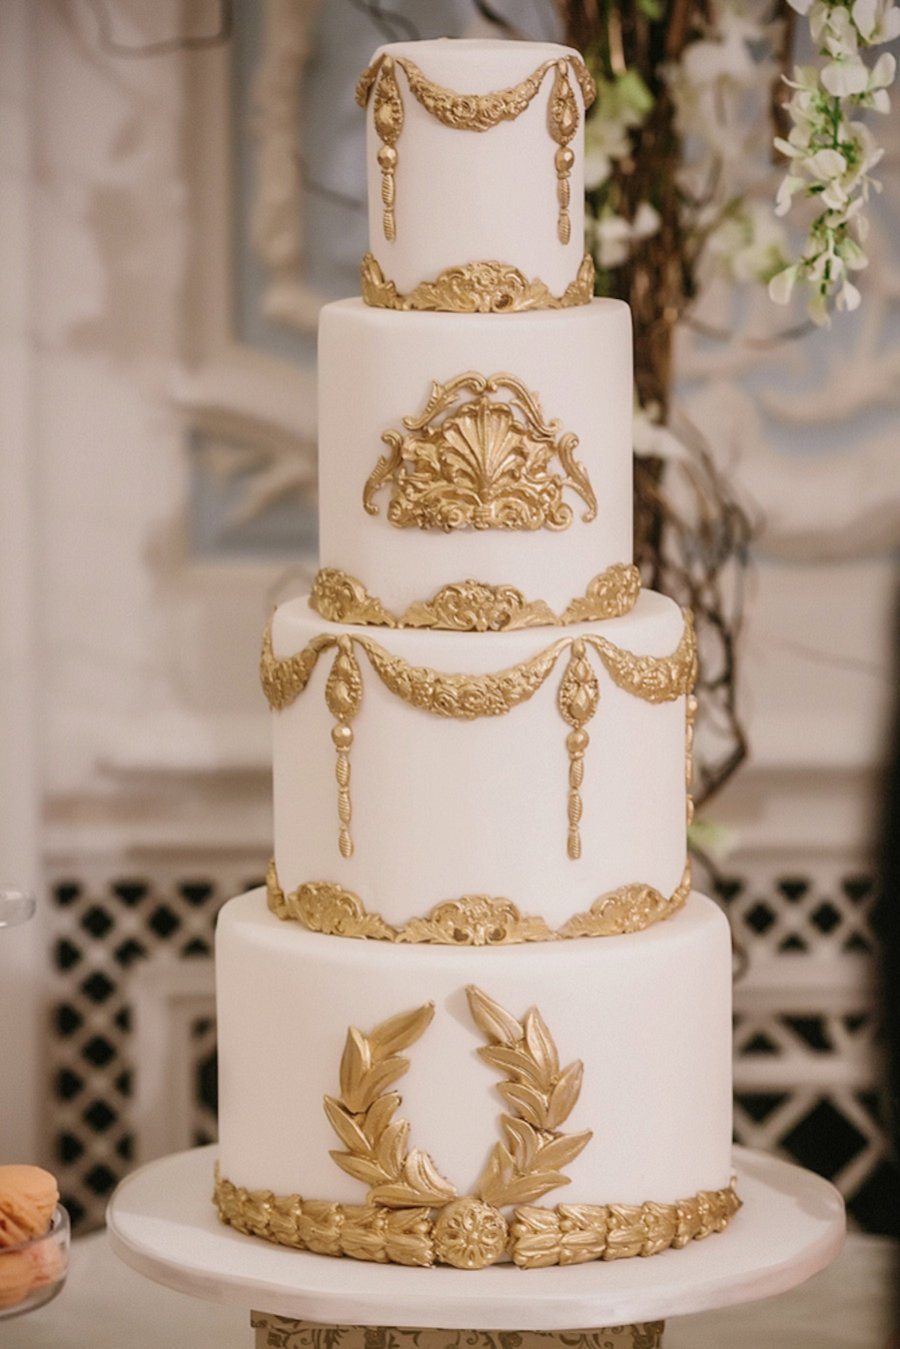 Wedding Cake White And Gold
 Top 10 Wedding Cake Trends for 2016